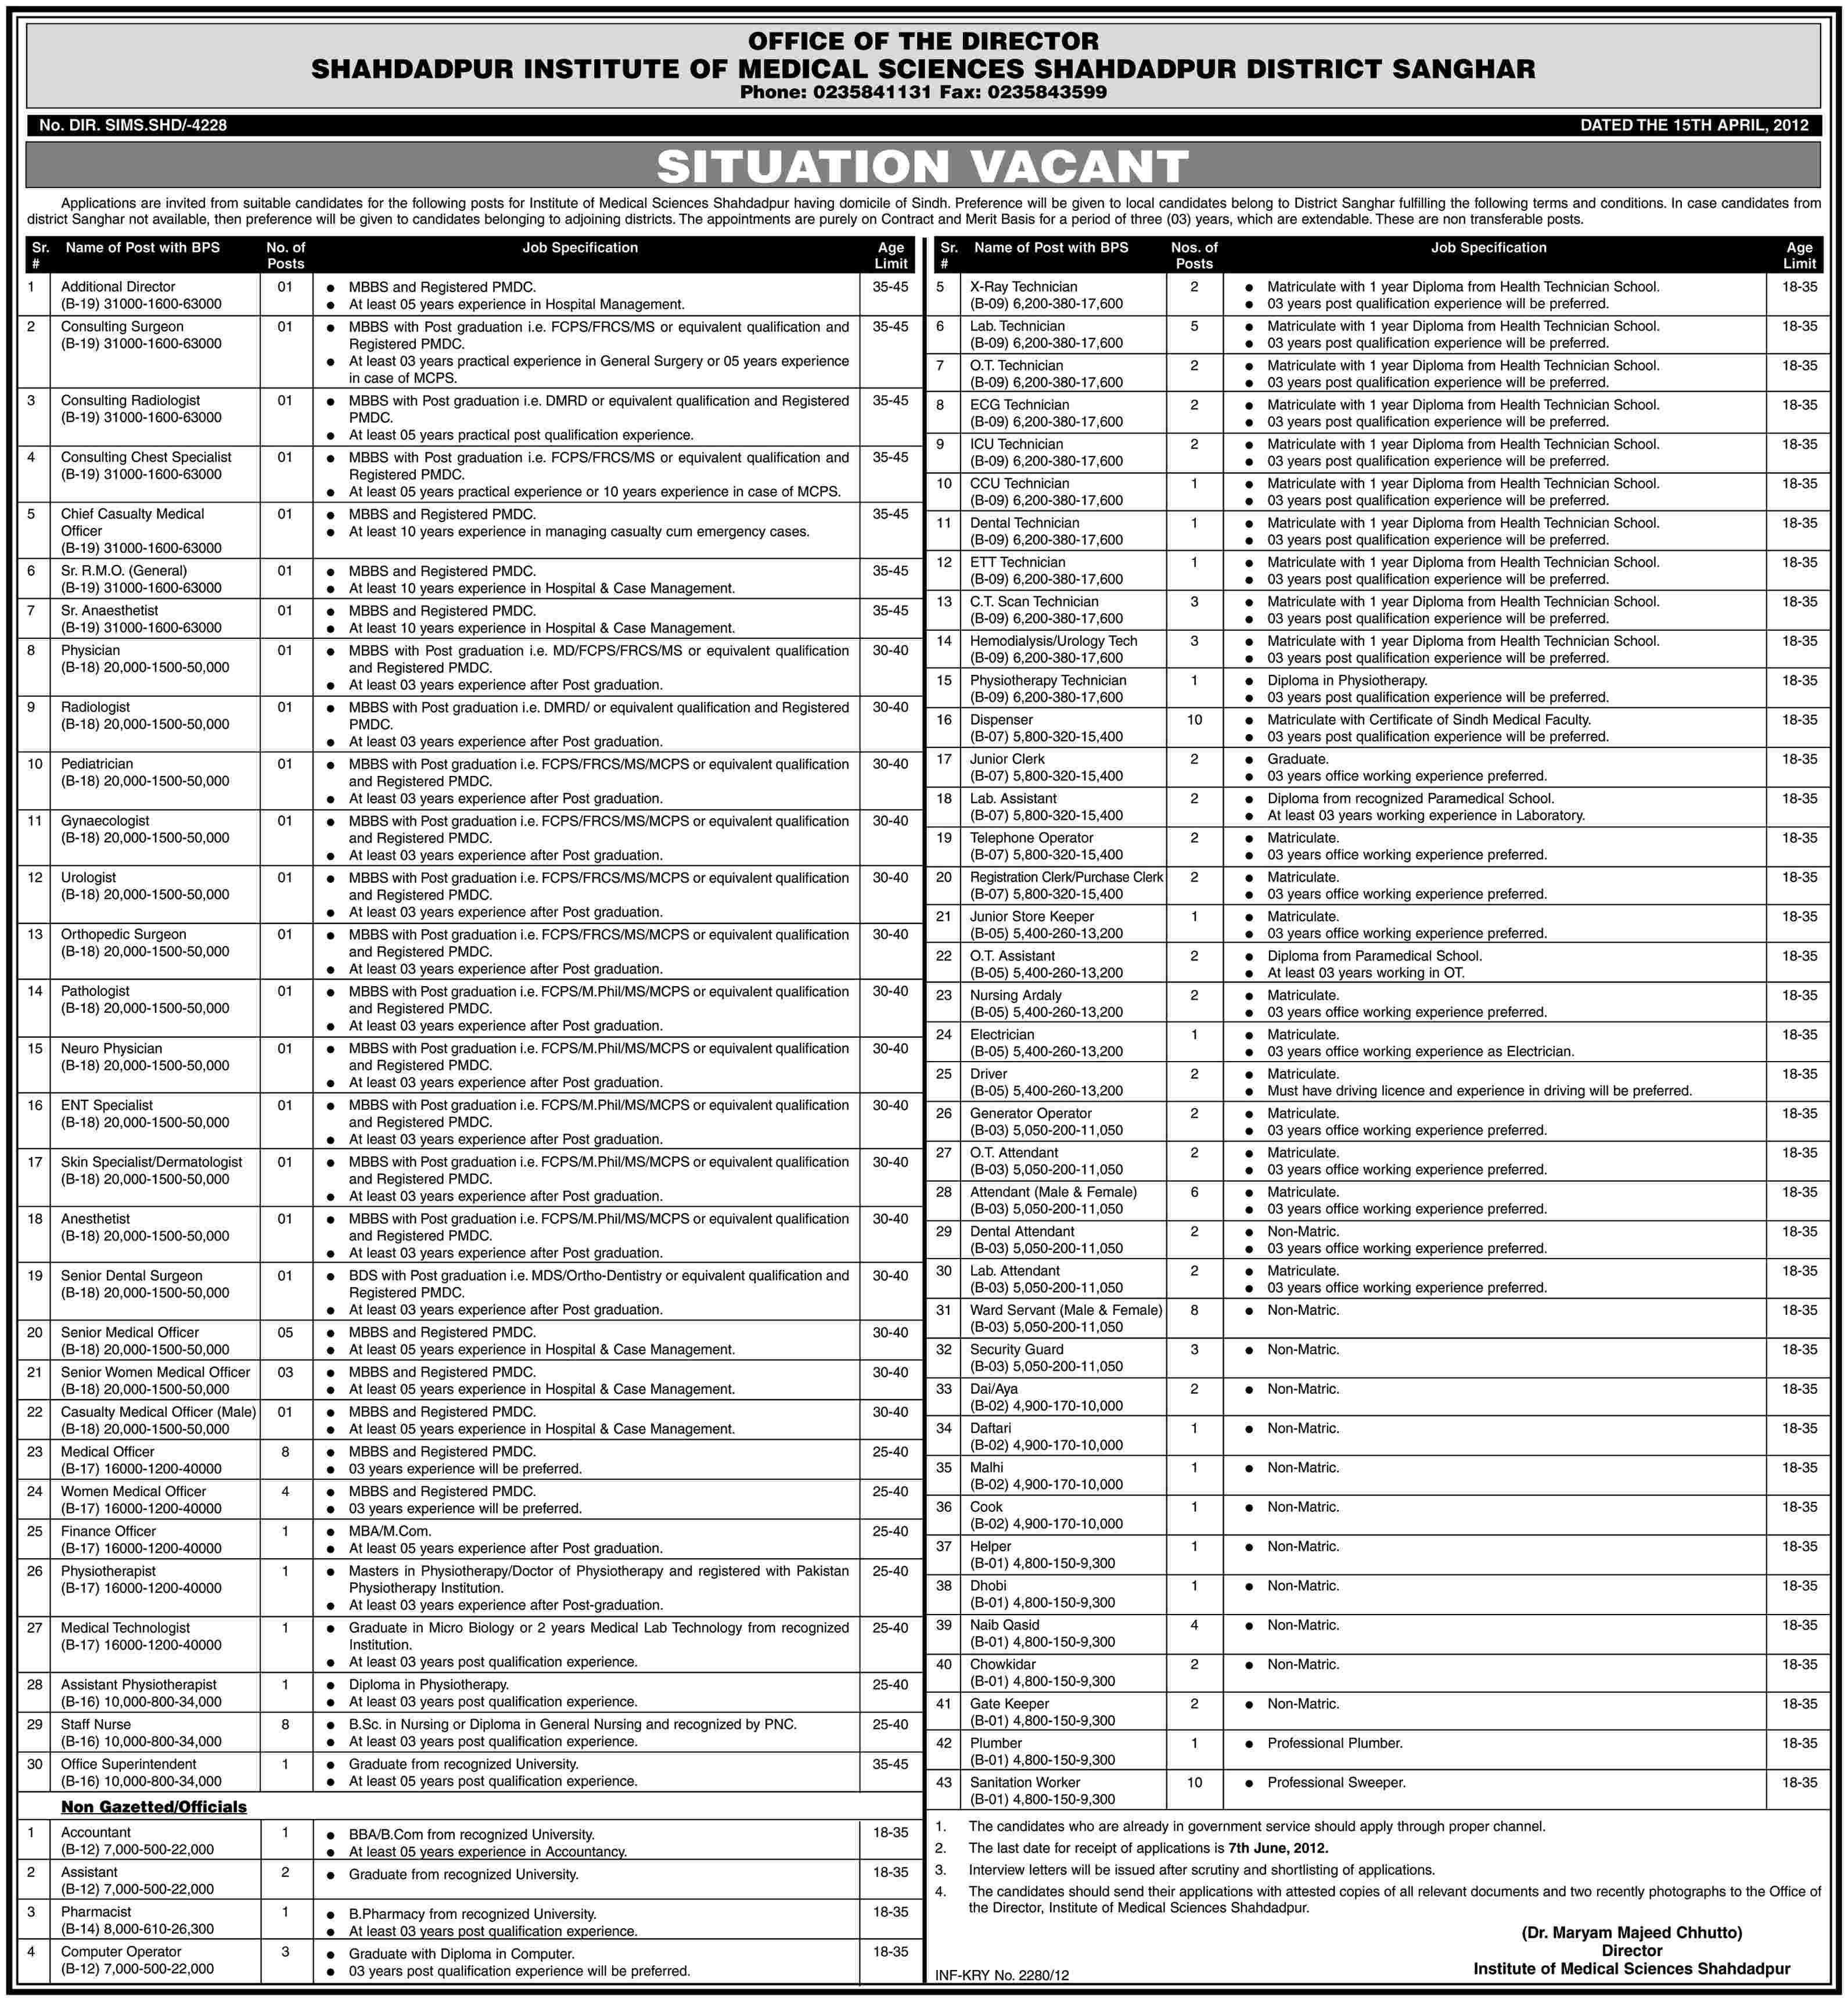 Gazetted and Non-Gazetted Medical Staff Required at Shohdad Pur Institute of Medical Sciences